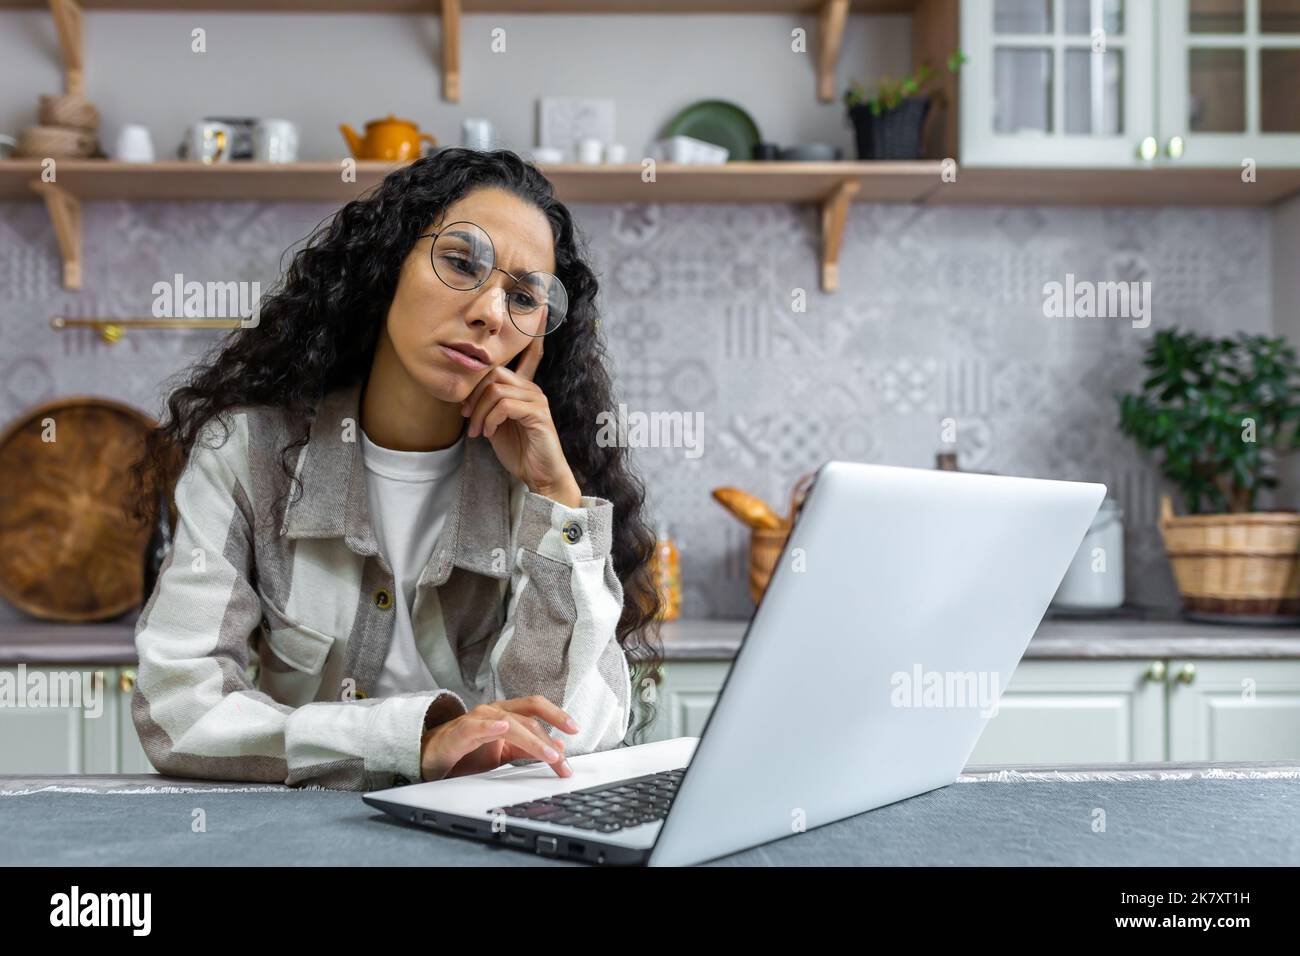 Sad and thinking woman working at home using laptop, Hispanic woman in kitchen at table wearing glasses and curly hair, businesswoman working remotely at home alone. Stock Photo